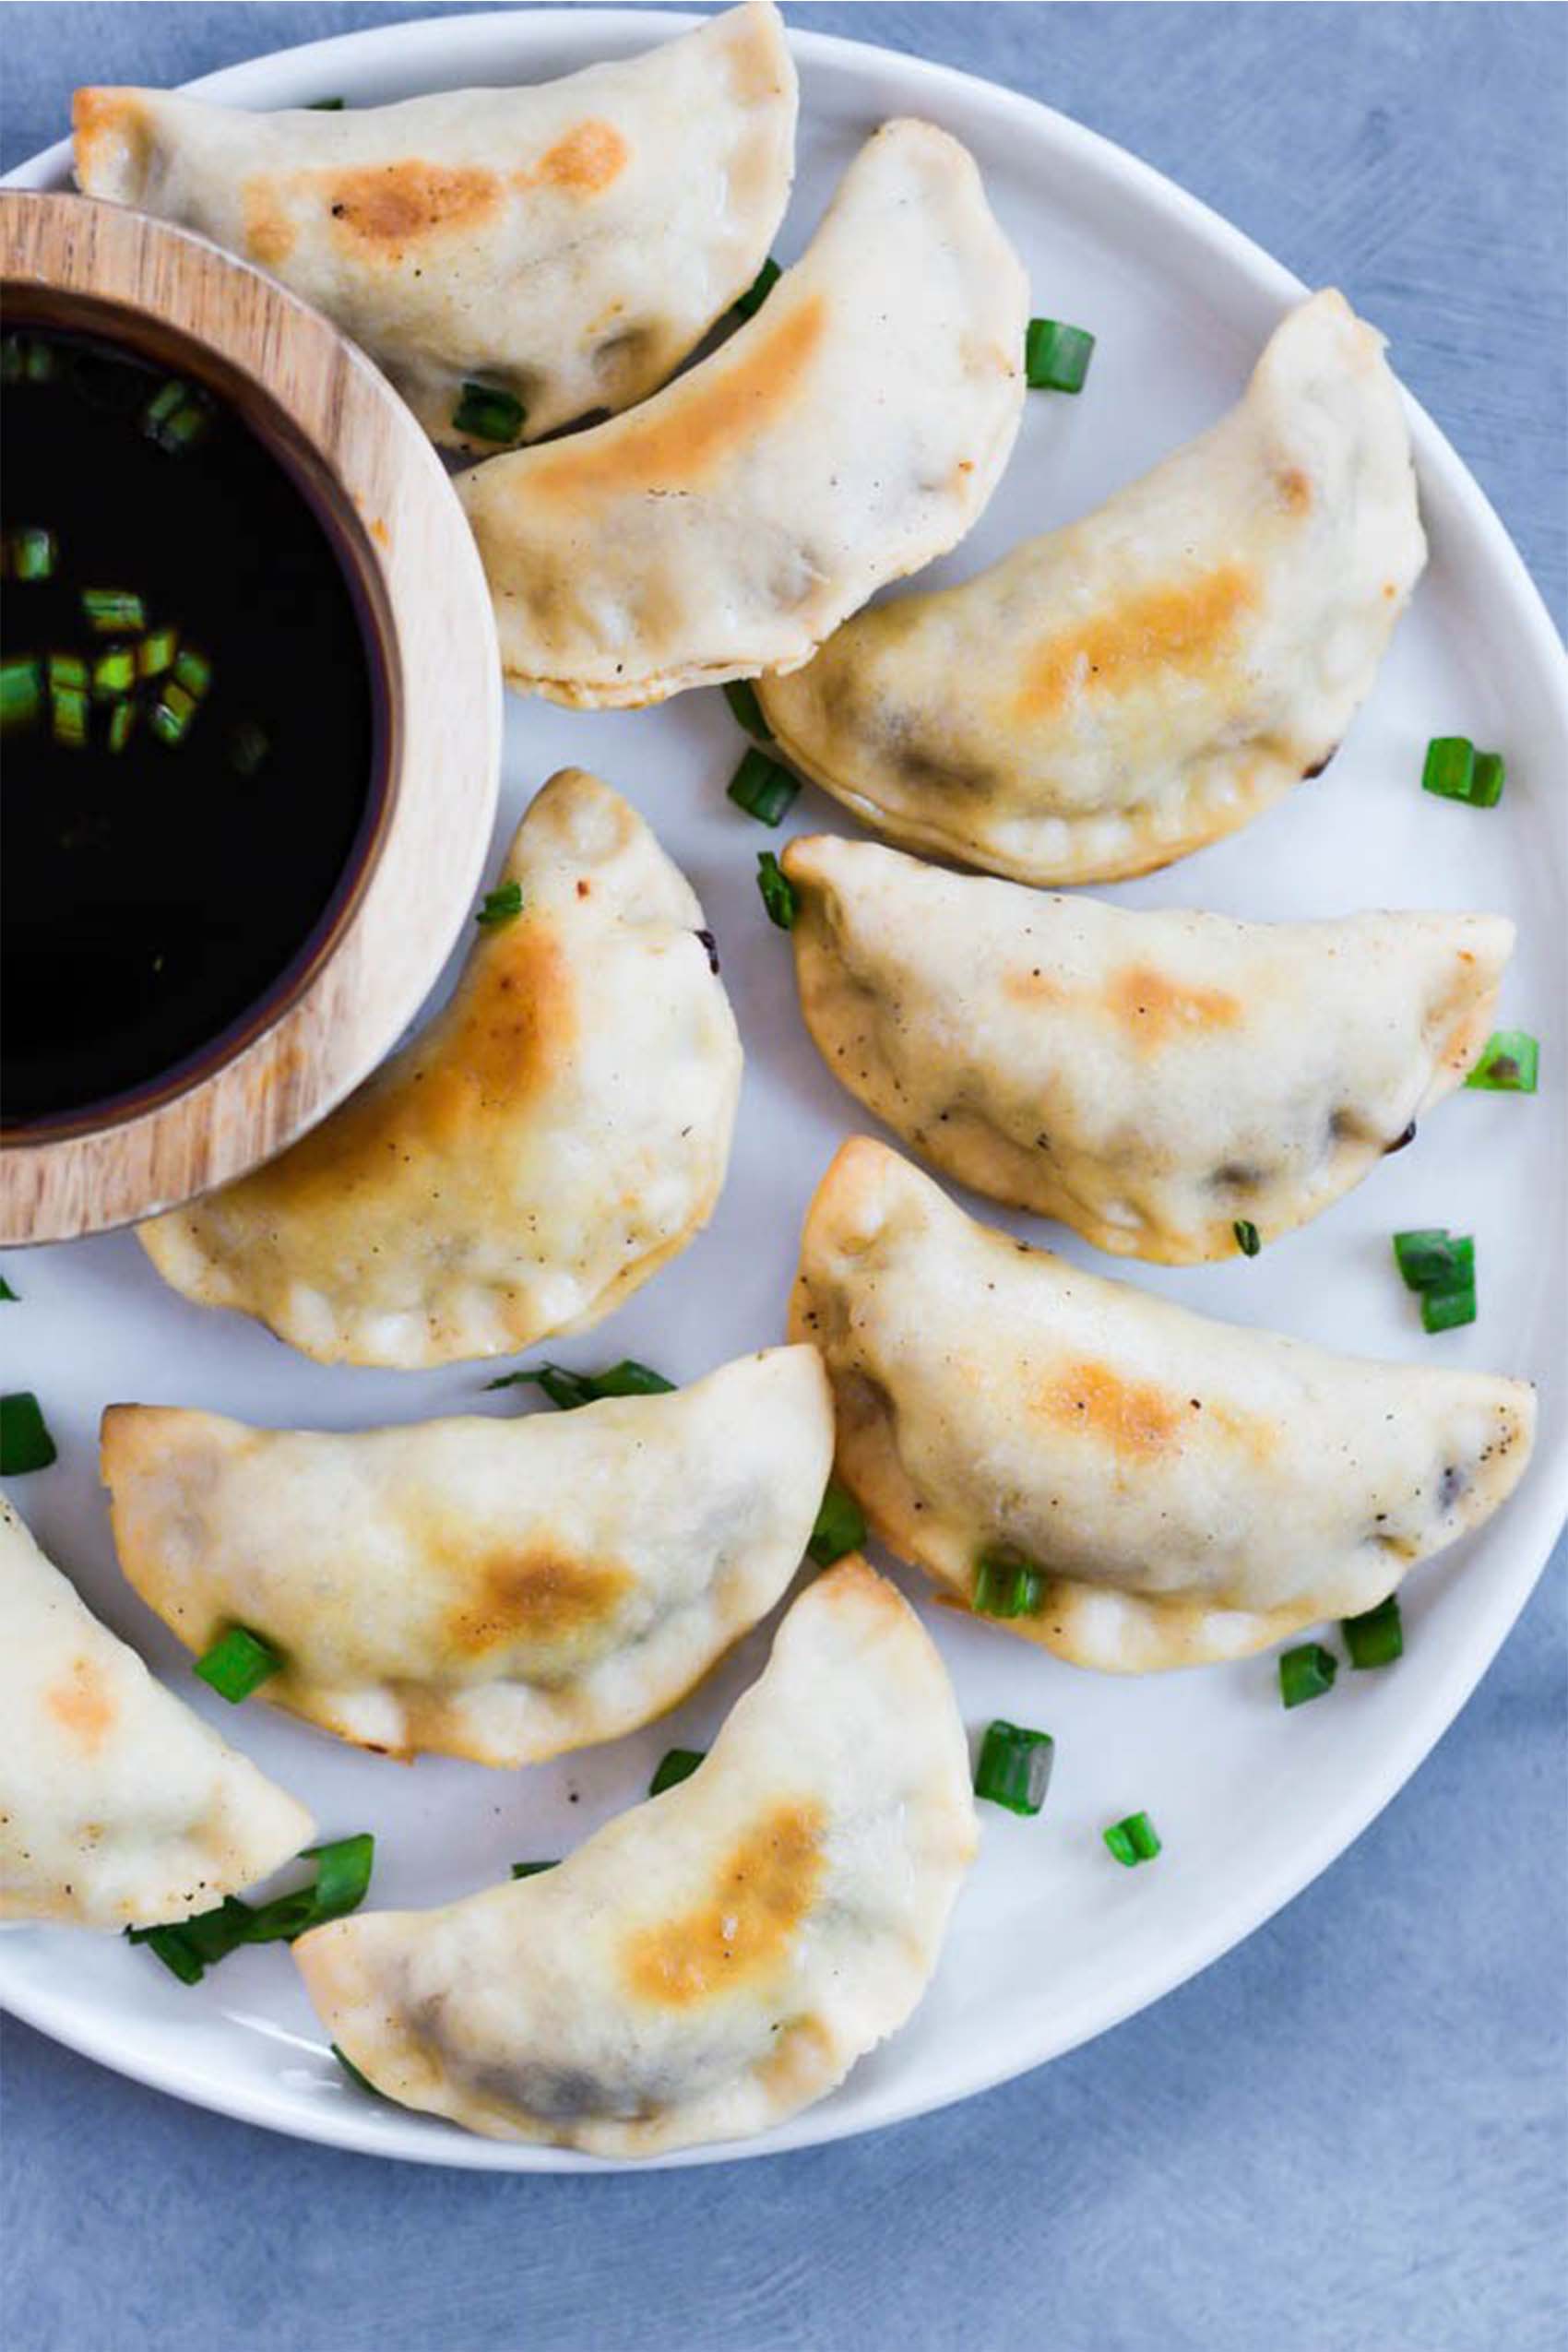 a plate of vegan pot stickers served with a side of soy sauce